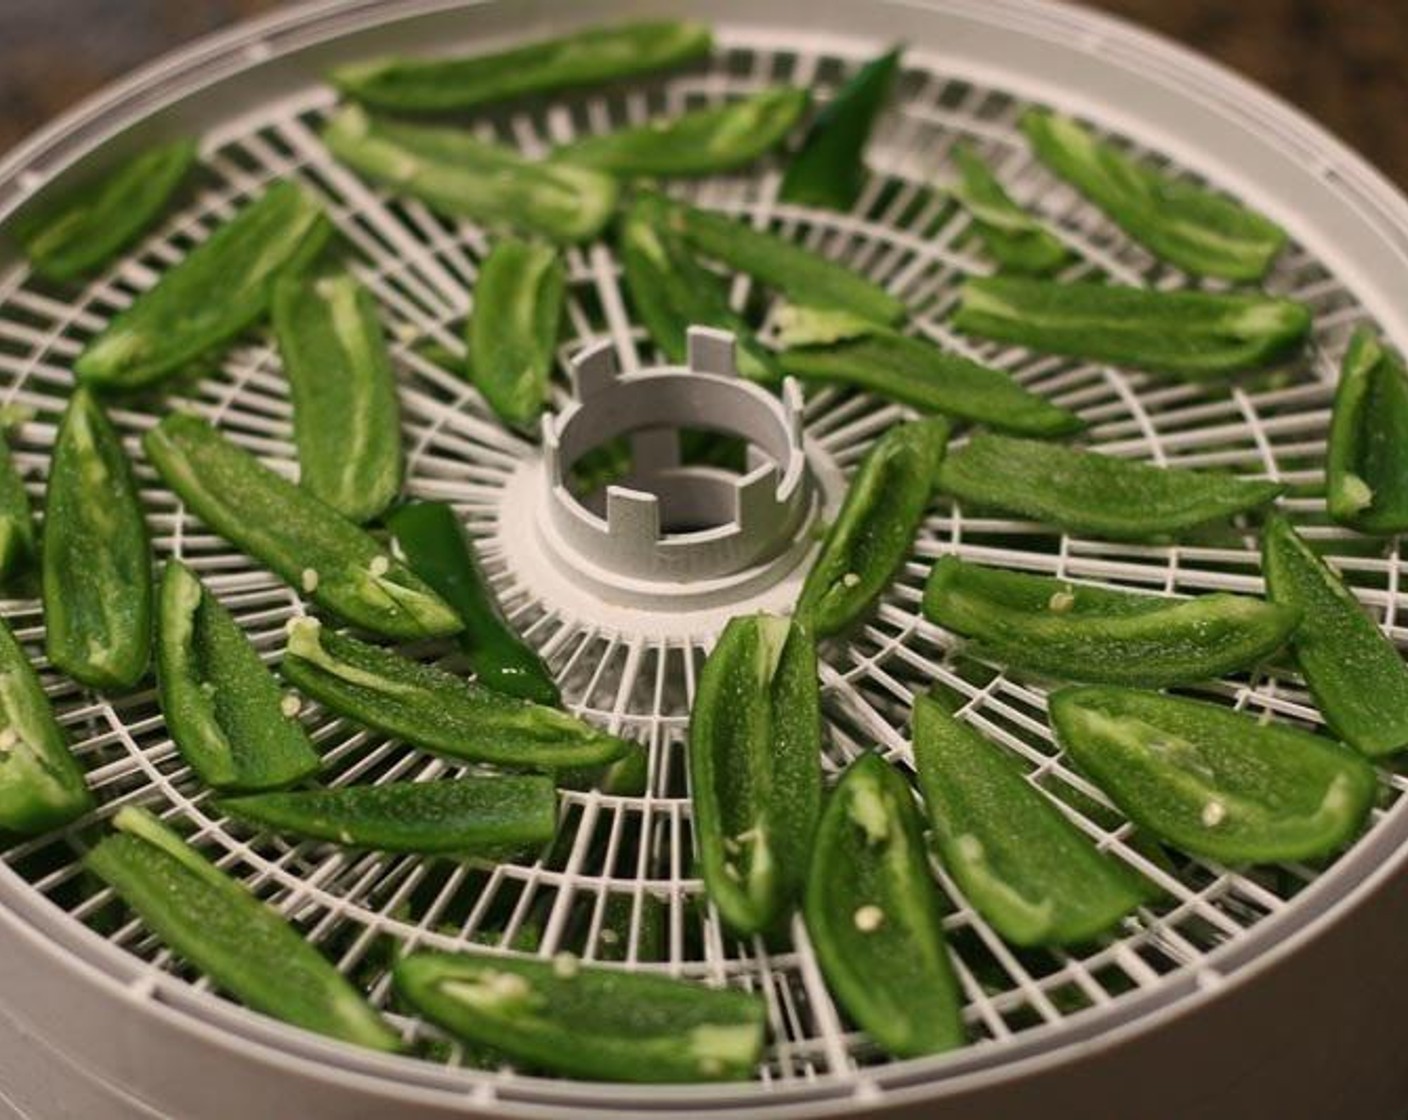 step 2 In a dehydrator, dehydrate the jalapeños according to your directions. I dehydrated the peppers at 145 degrees F (63 degrees C) for 15 hours. I recommend doing this outdoors because of the strong fumes.